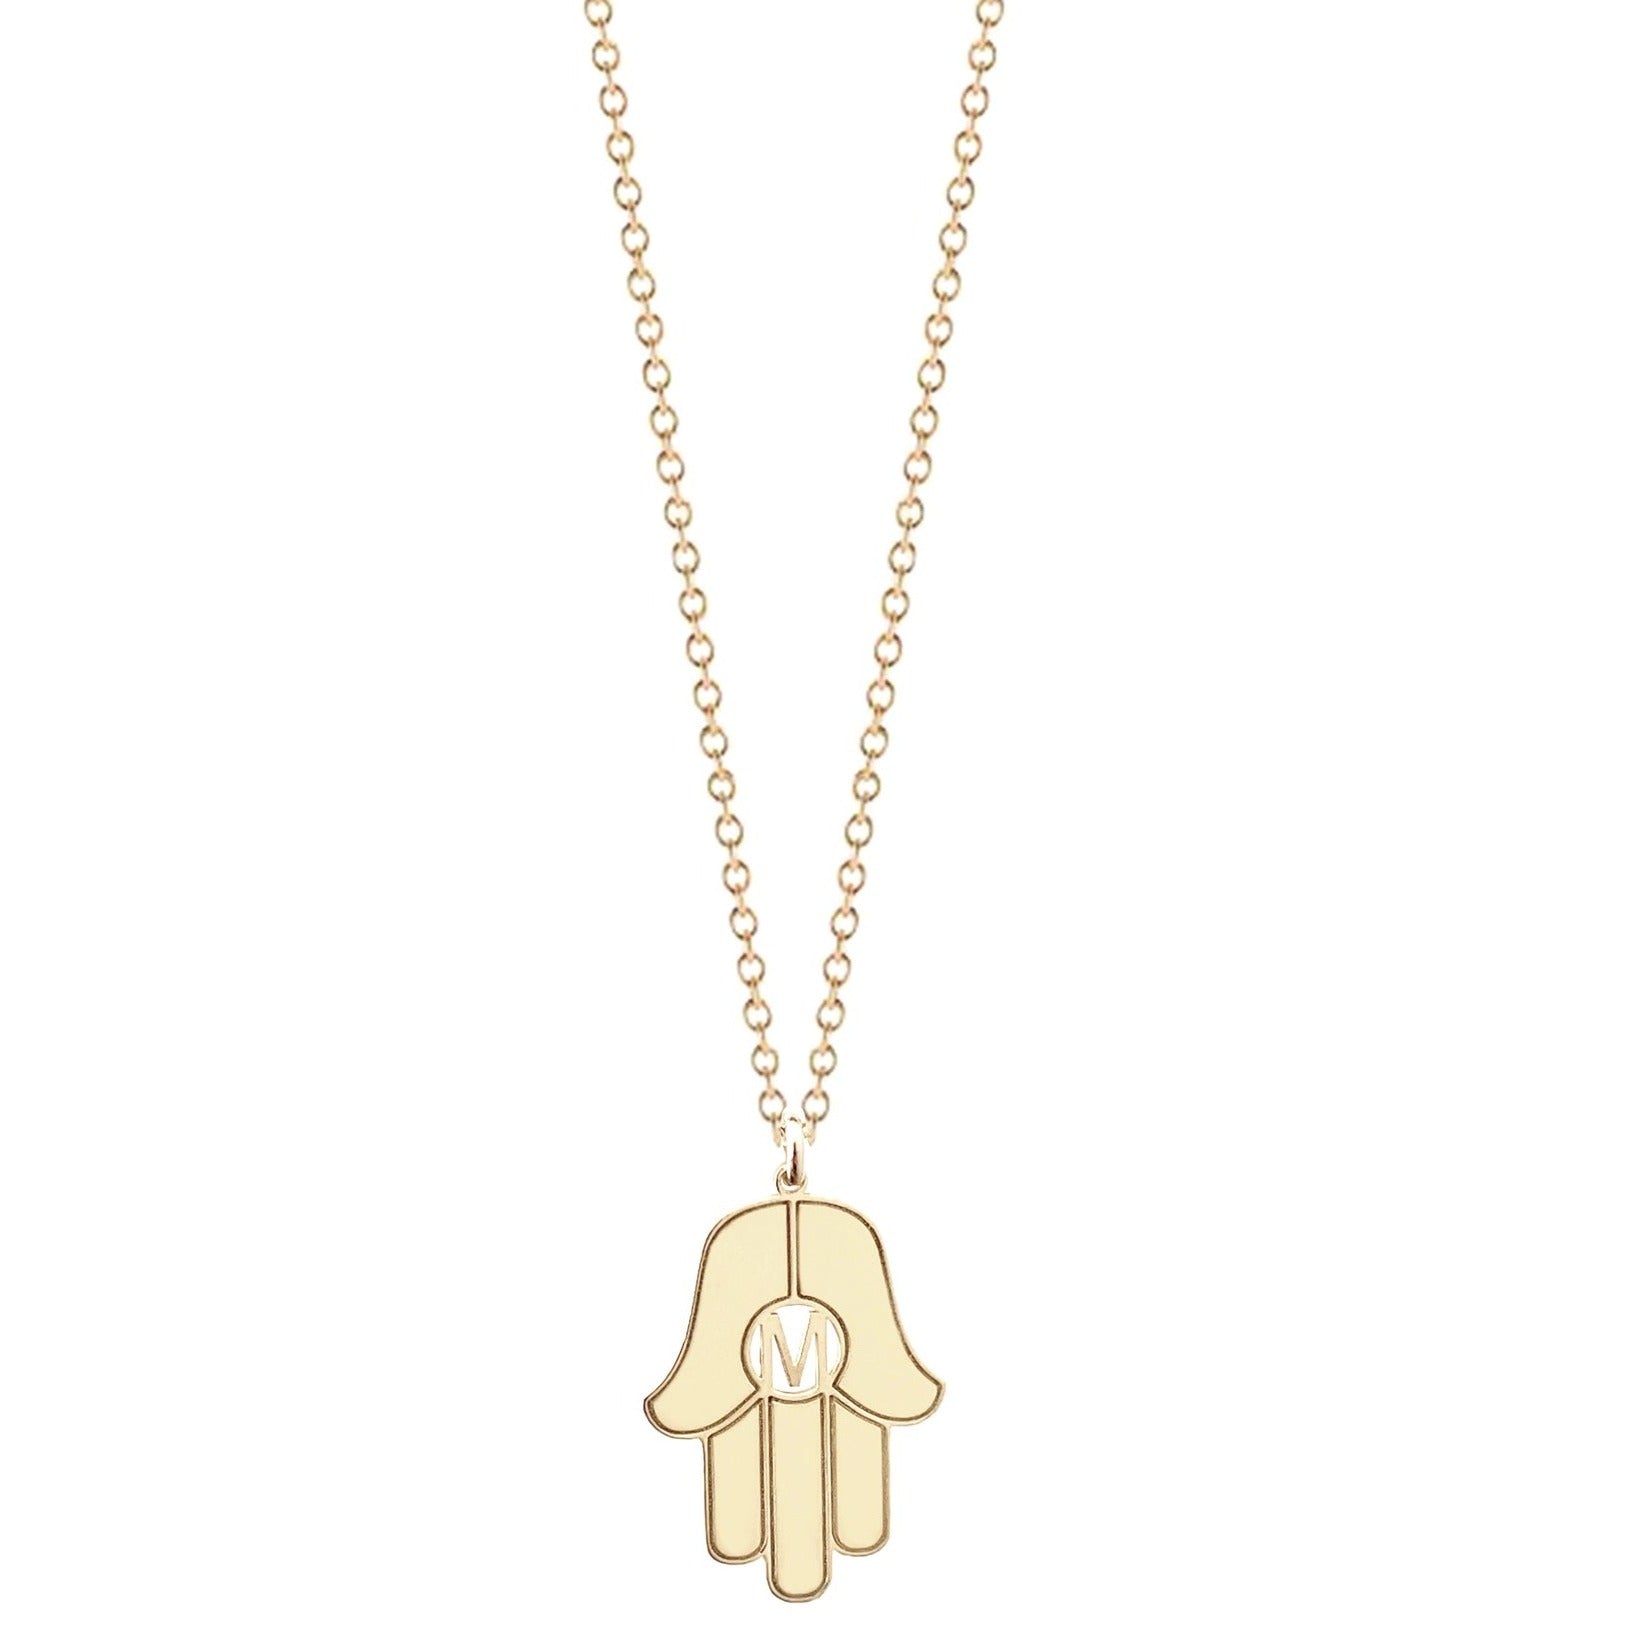 Miriam Merenfeld Jewelry Necklaces Stella Hamsa Initial Necklace - Gold or Sterling Silver